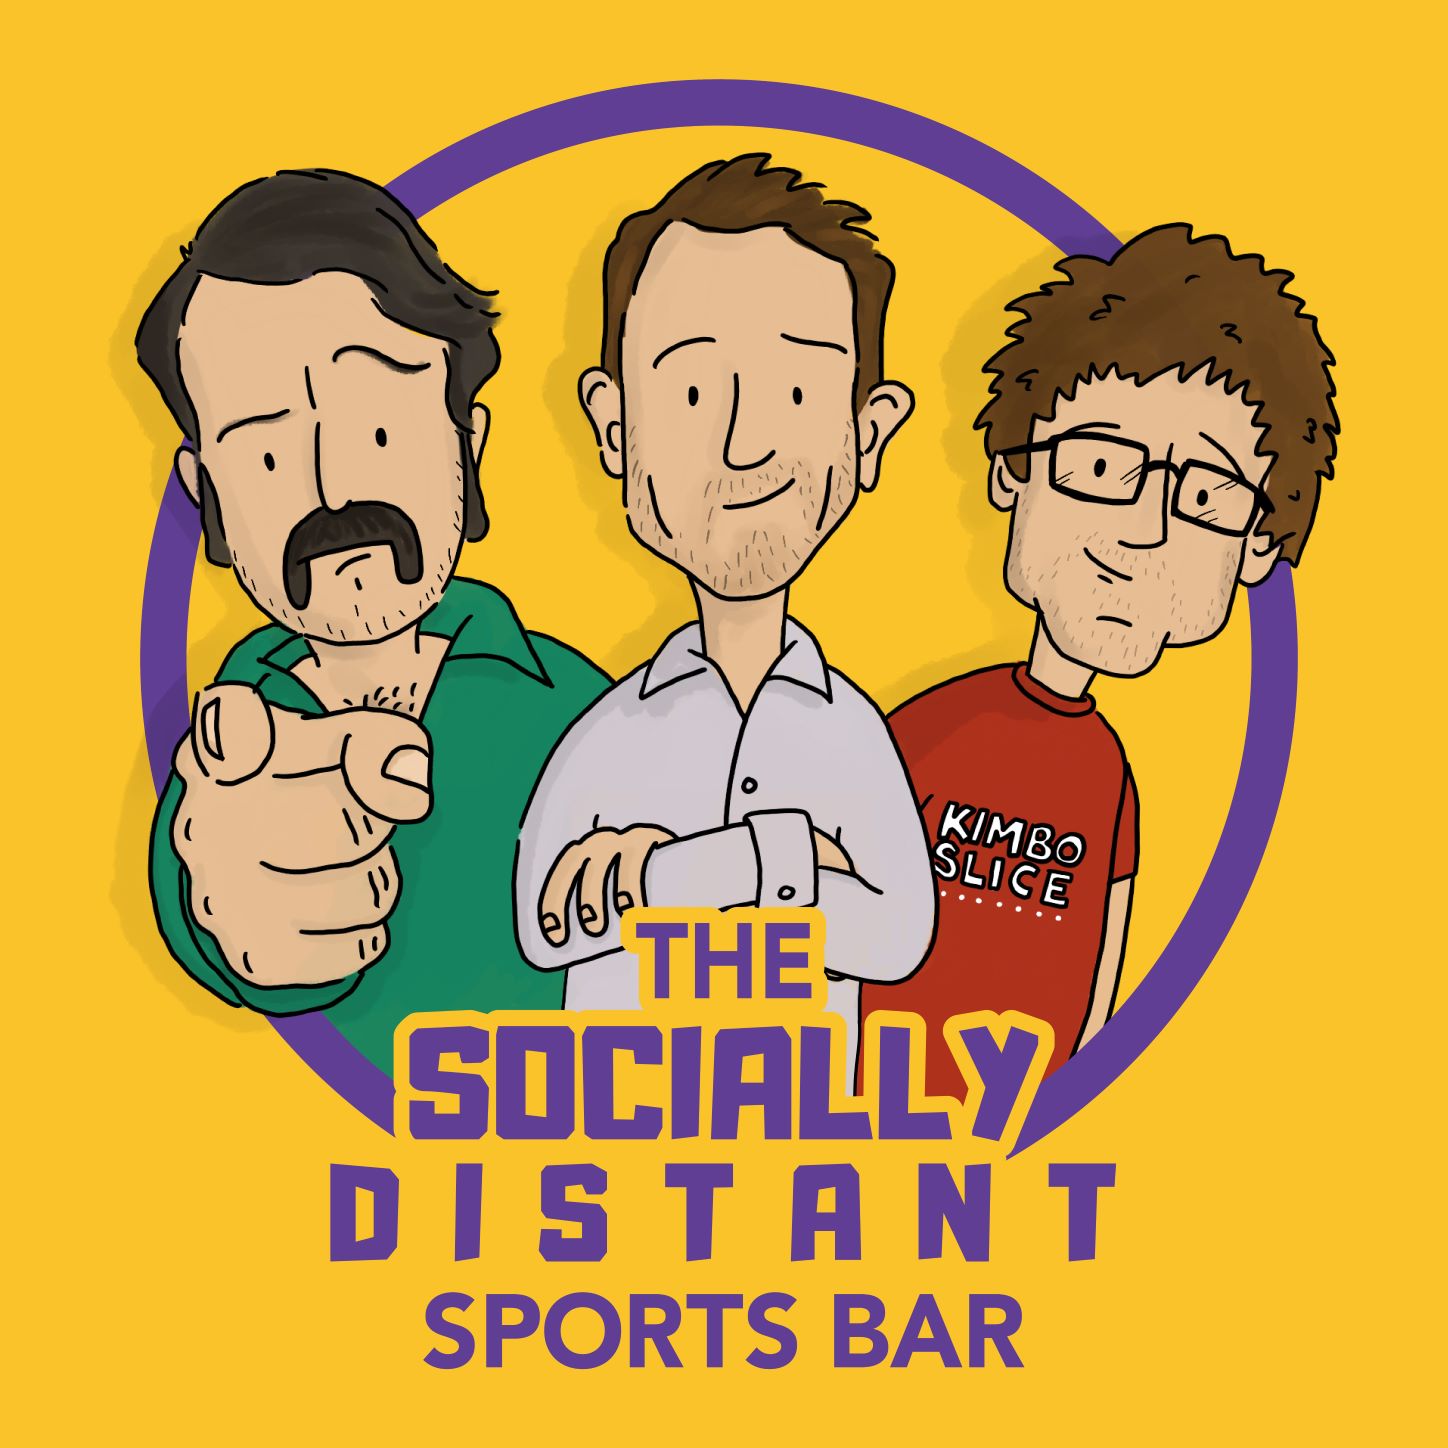 The Socially Distant Sports Bar image